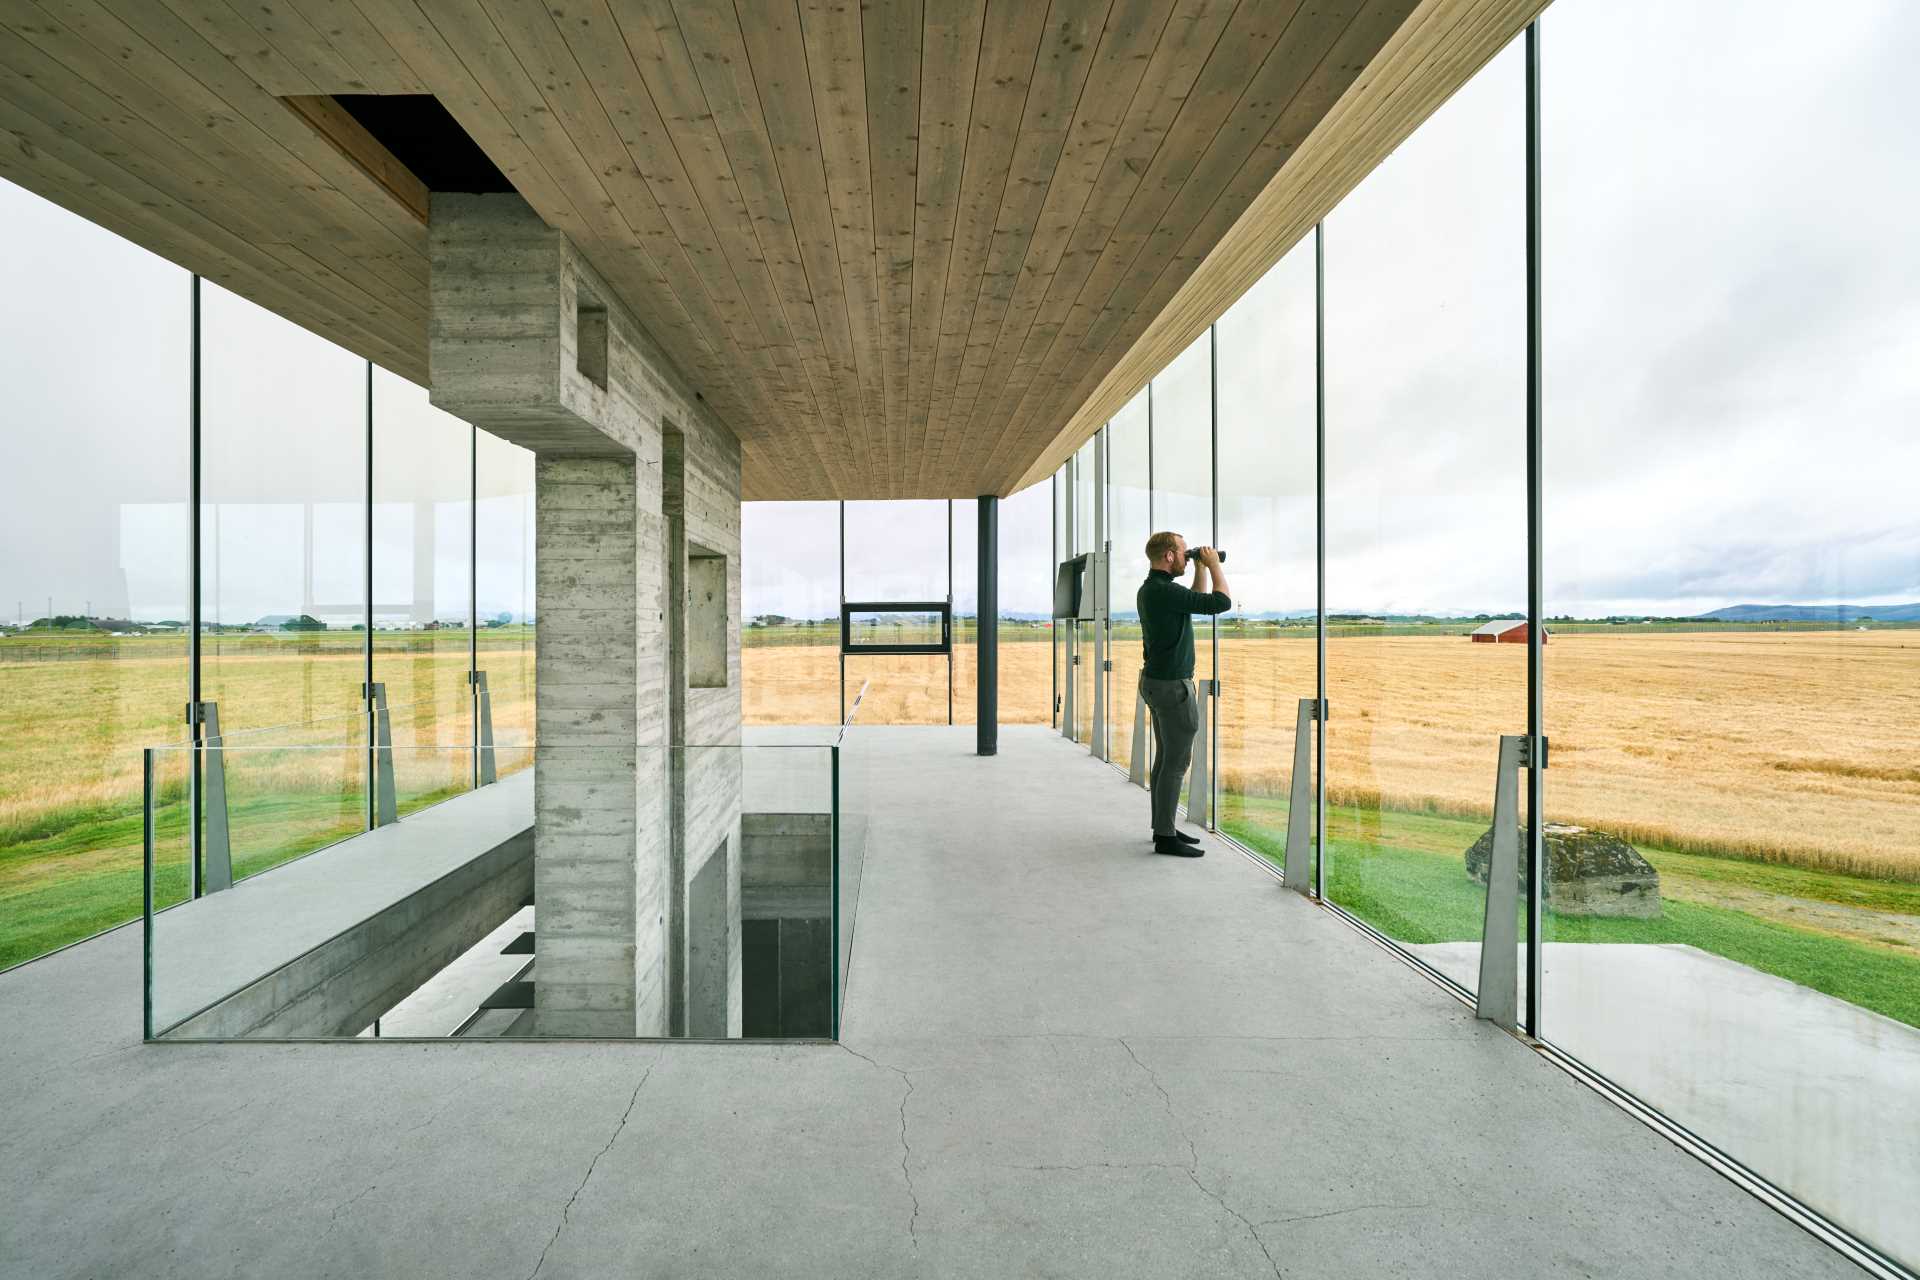 The floor-to-ceiling windows of this event space provide an unobstructed 360-degree panoramic view of nature, wildlife, and the air base.